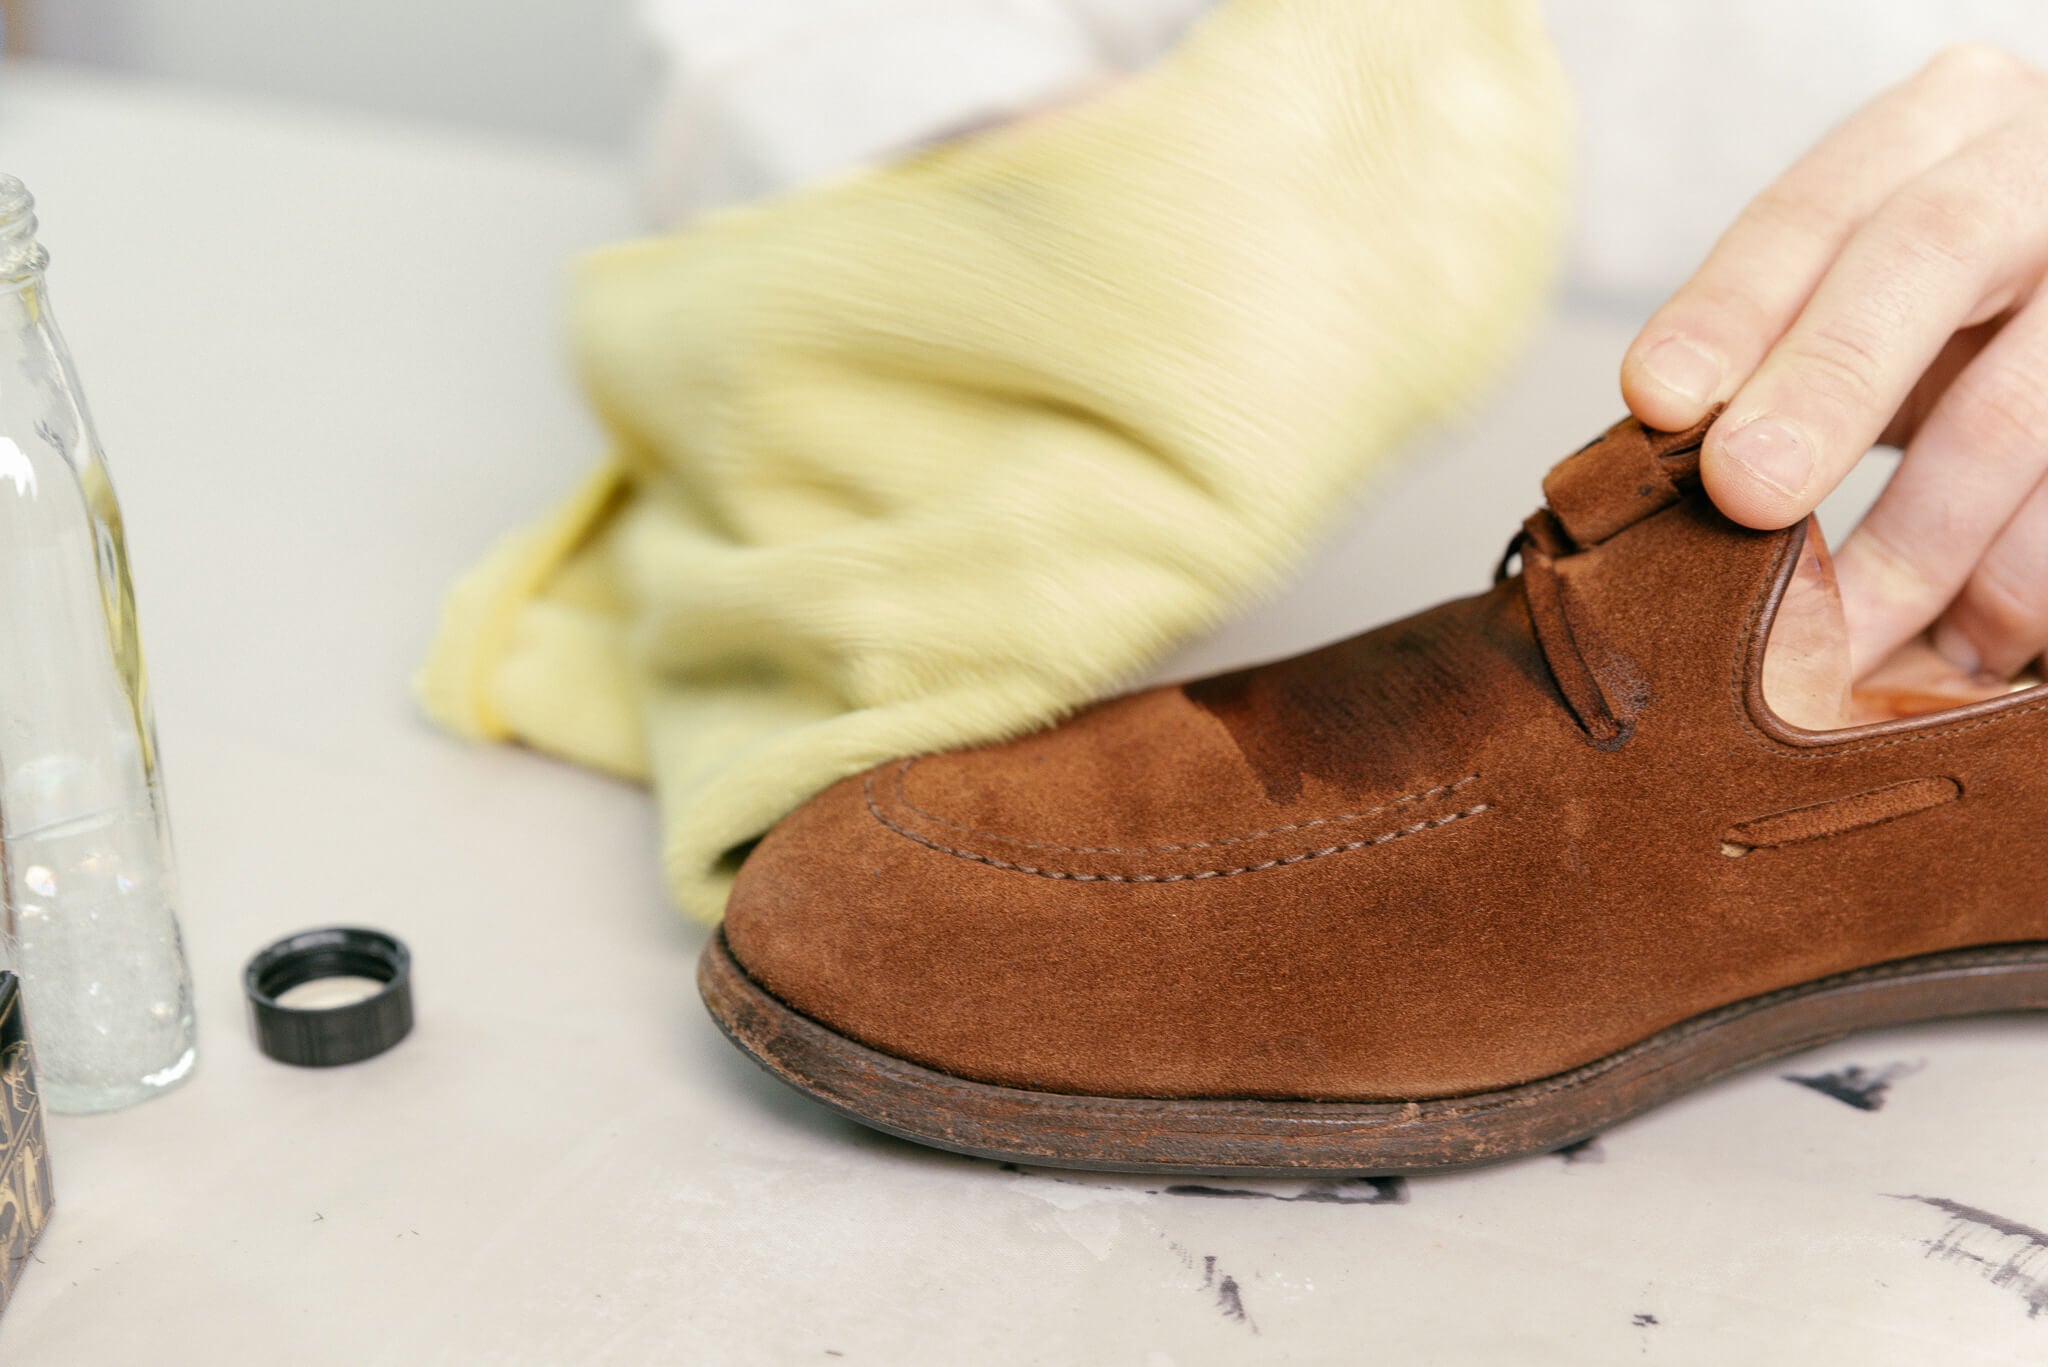 Shoe Care 201 – Caring for Suede